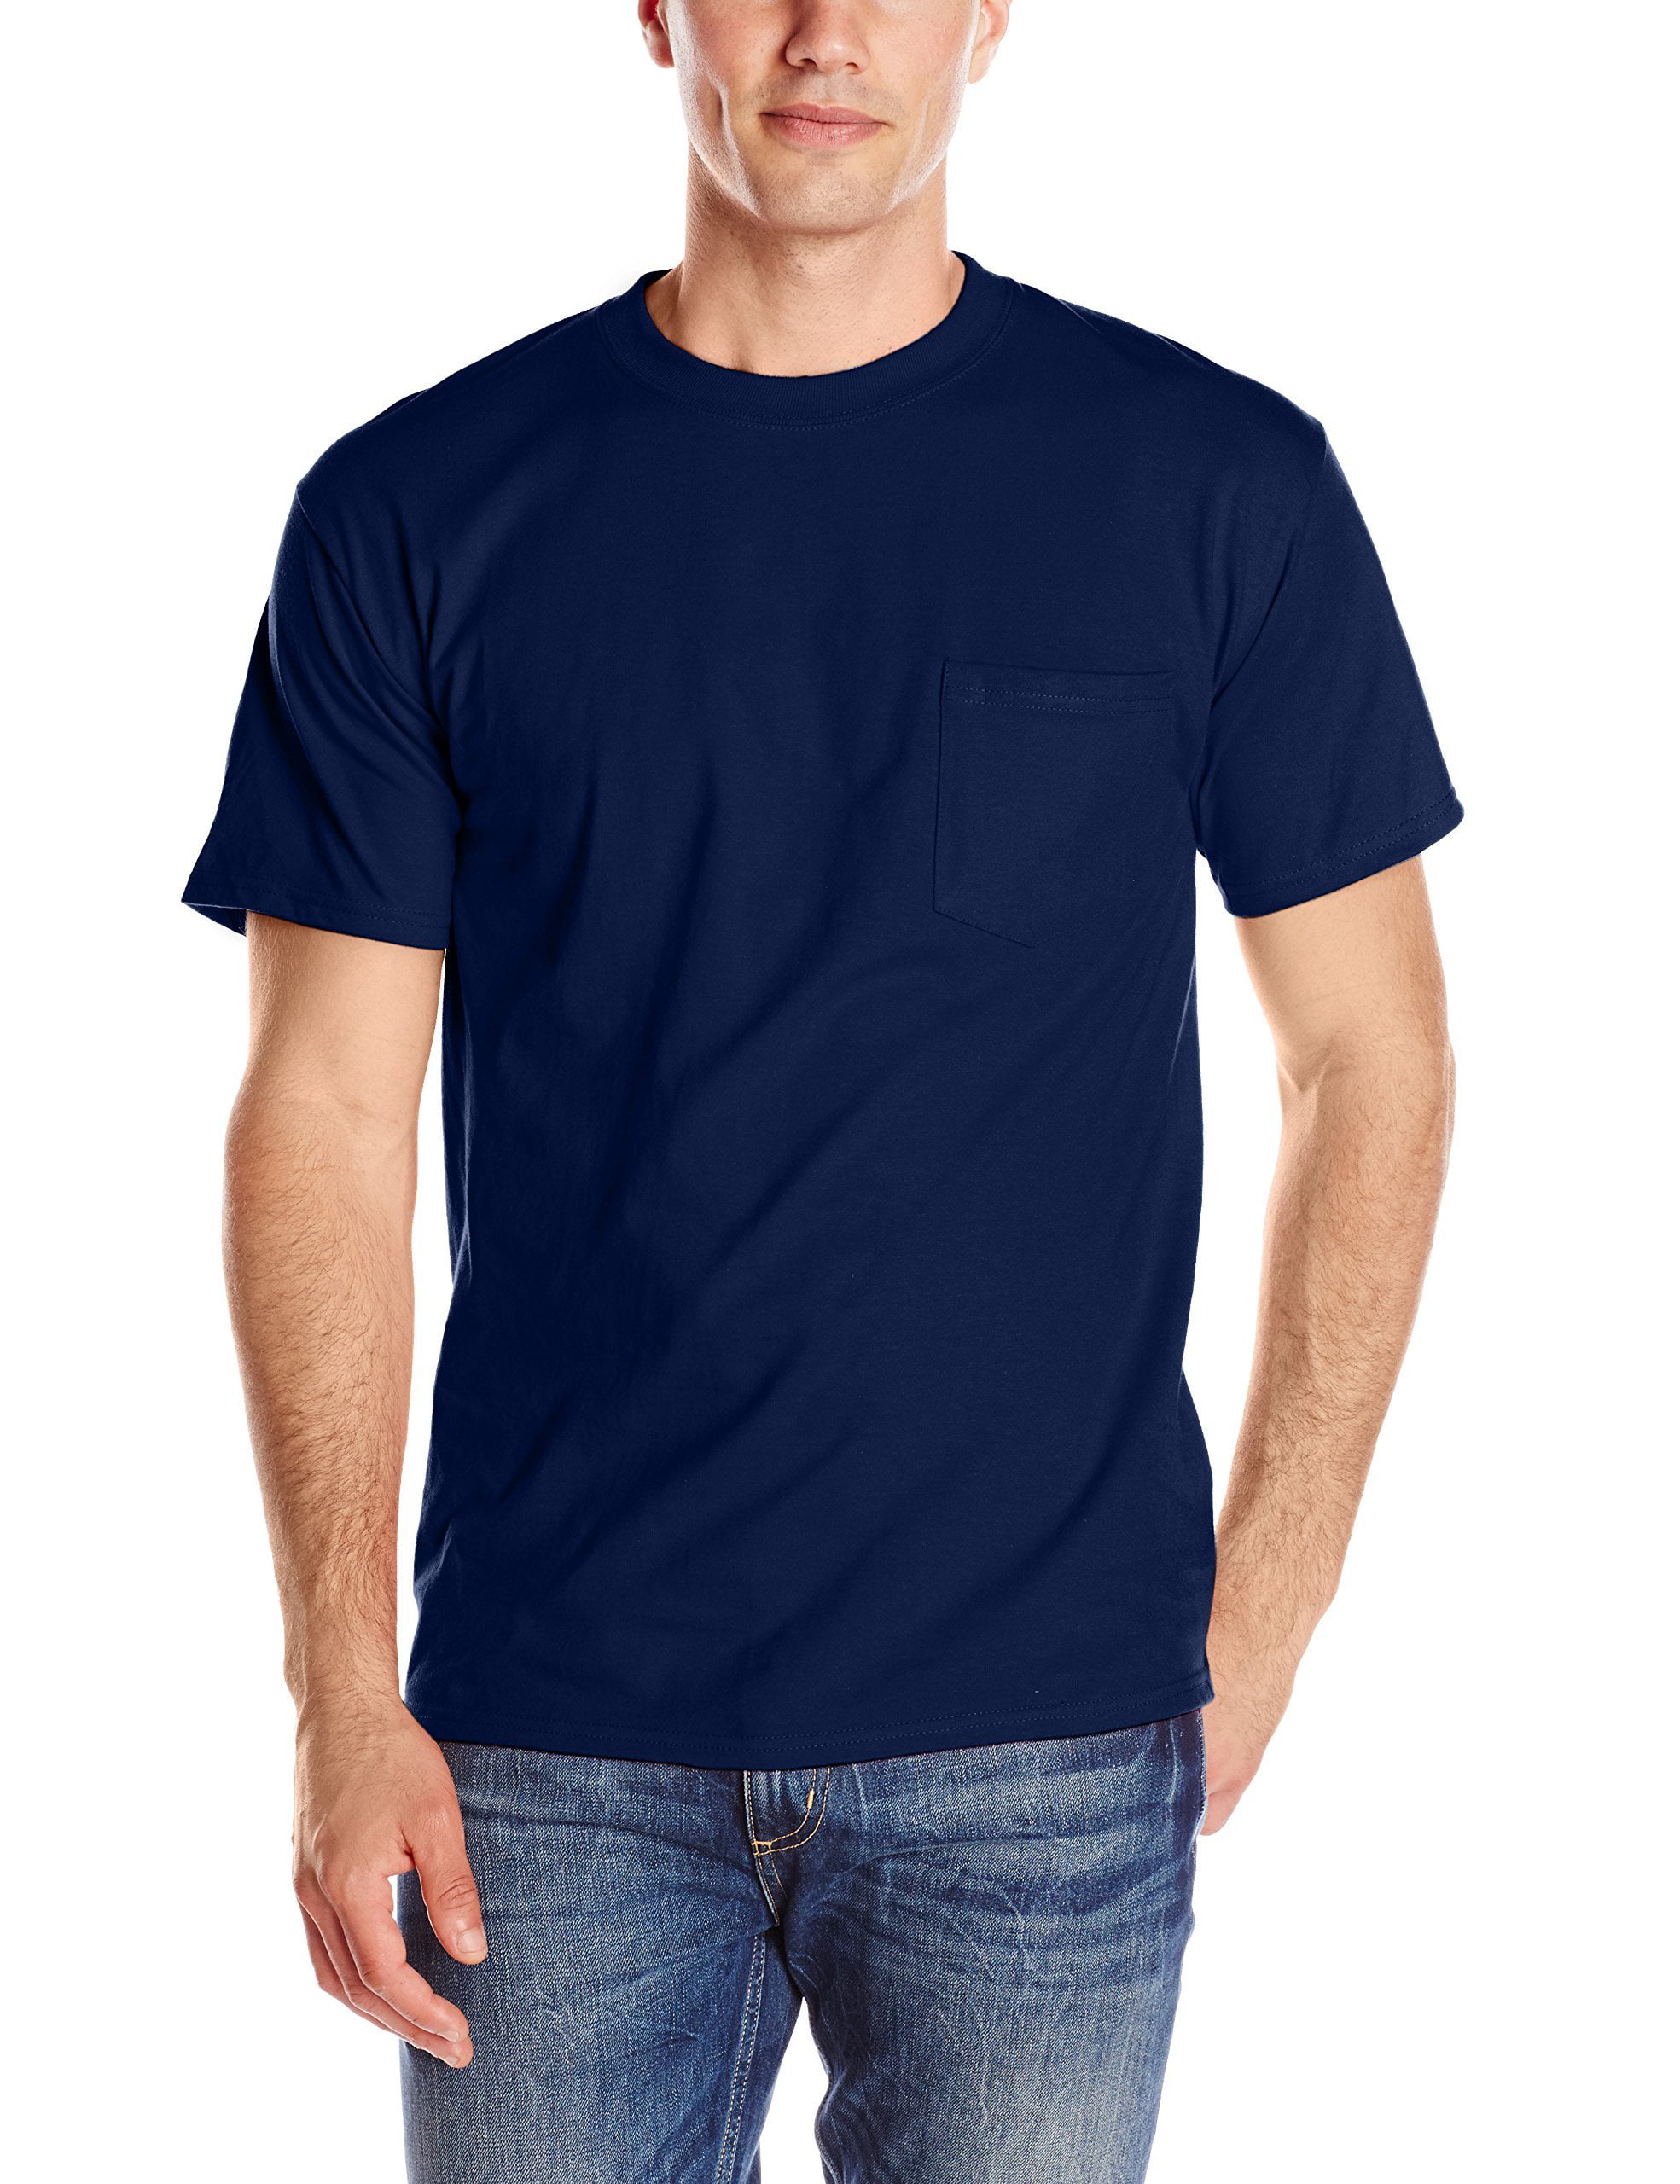 Hanes Men's Short-Sleeve Beefy T-Shirt with Pocket XX-Large Navy ...